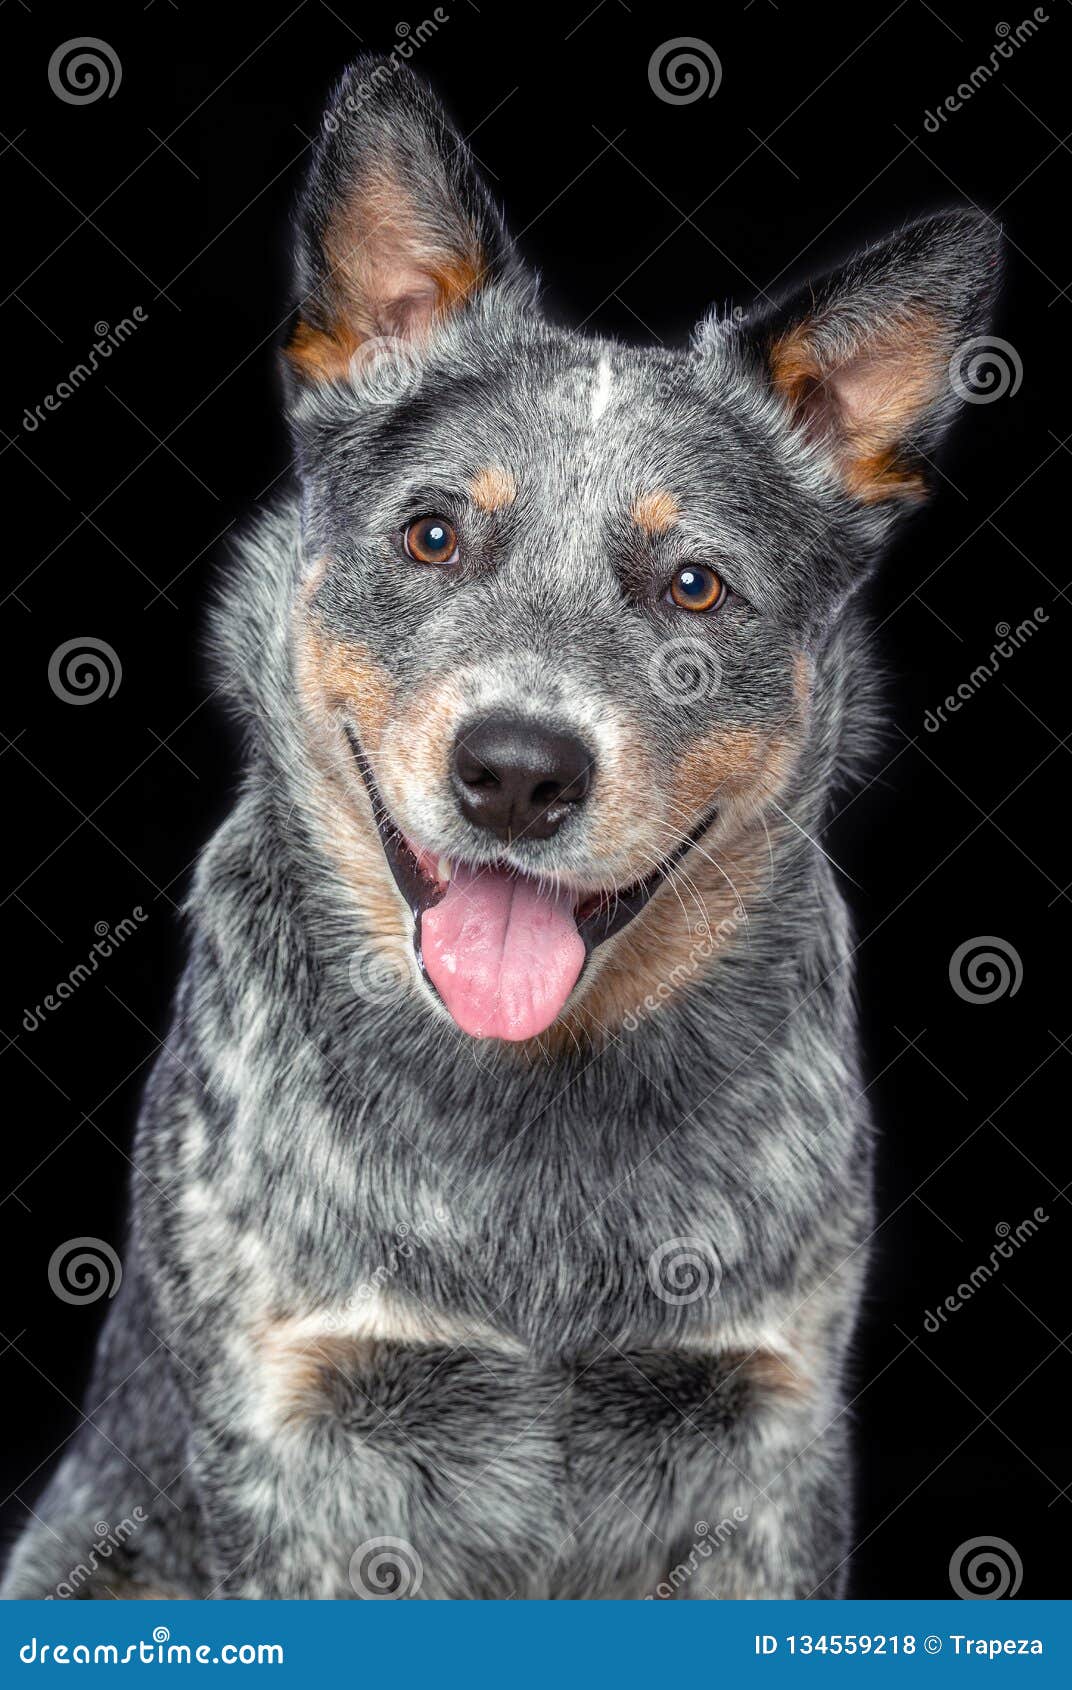 can a australian cattle dog and a american staffordshire terrier be friends